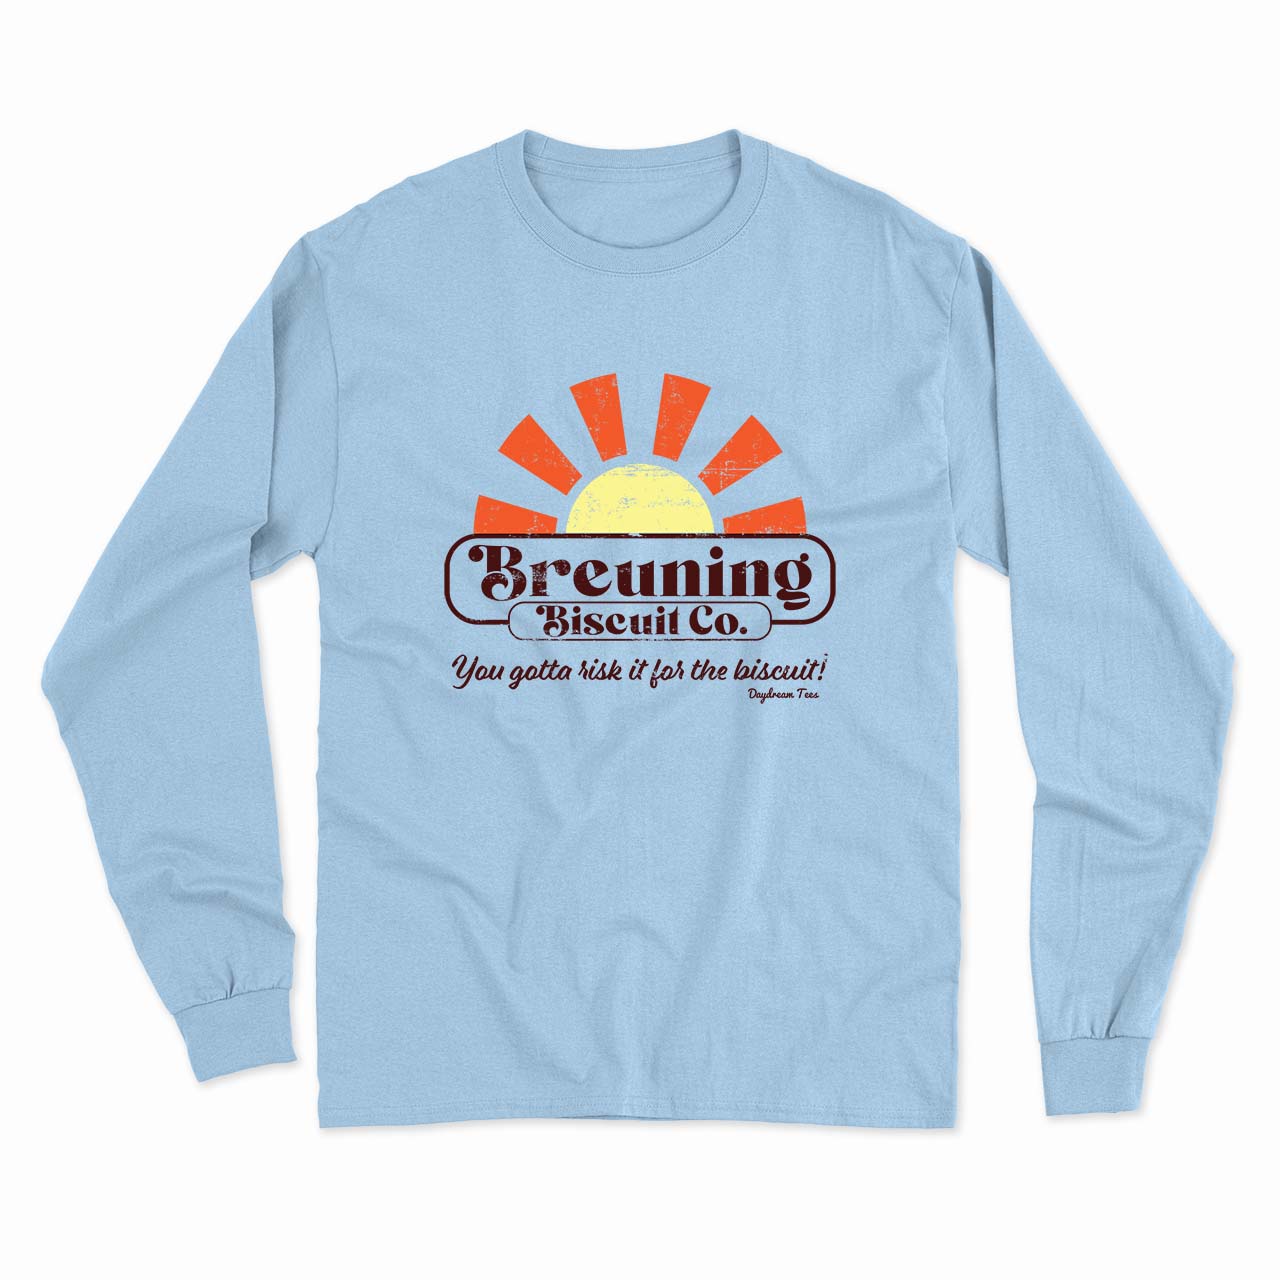 Daydream Tees Breuning Biscuit Co.